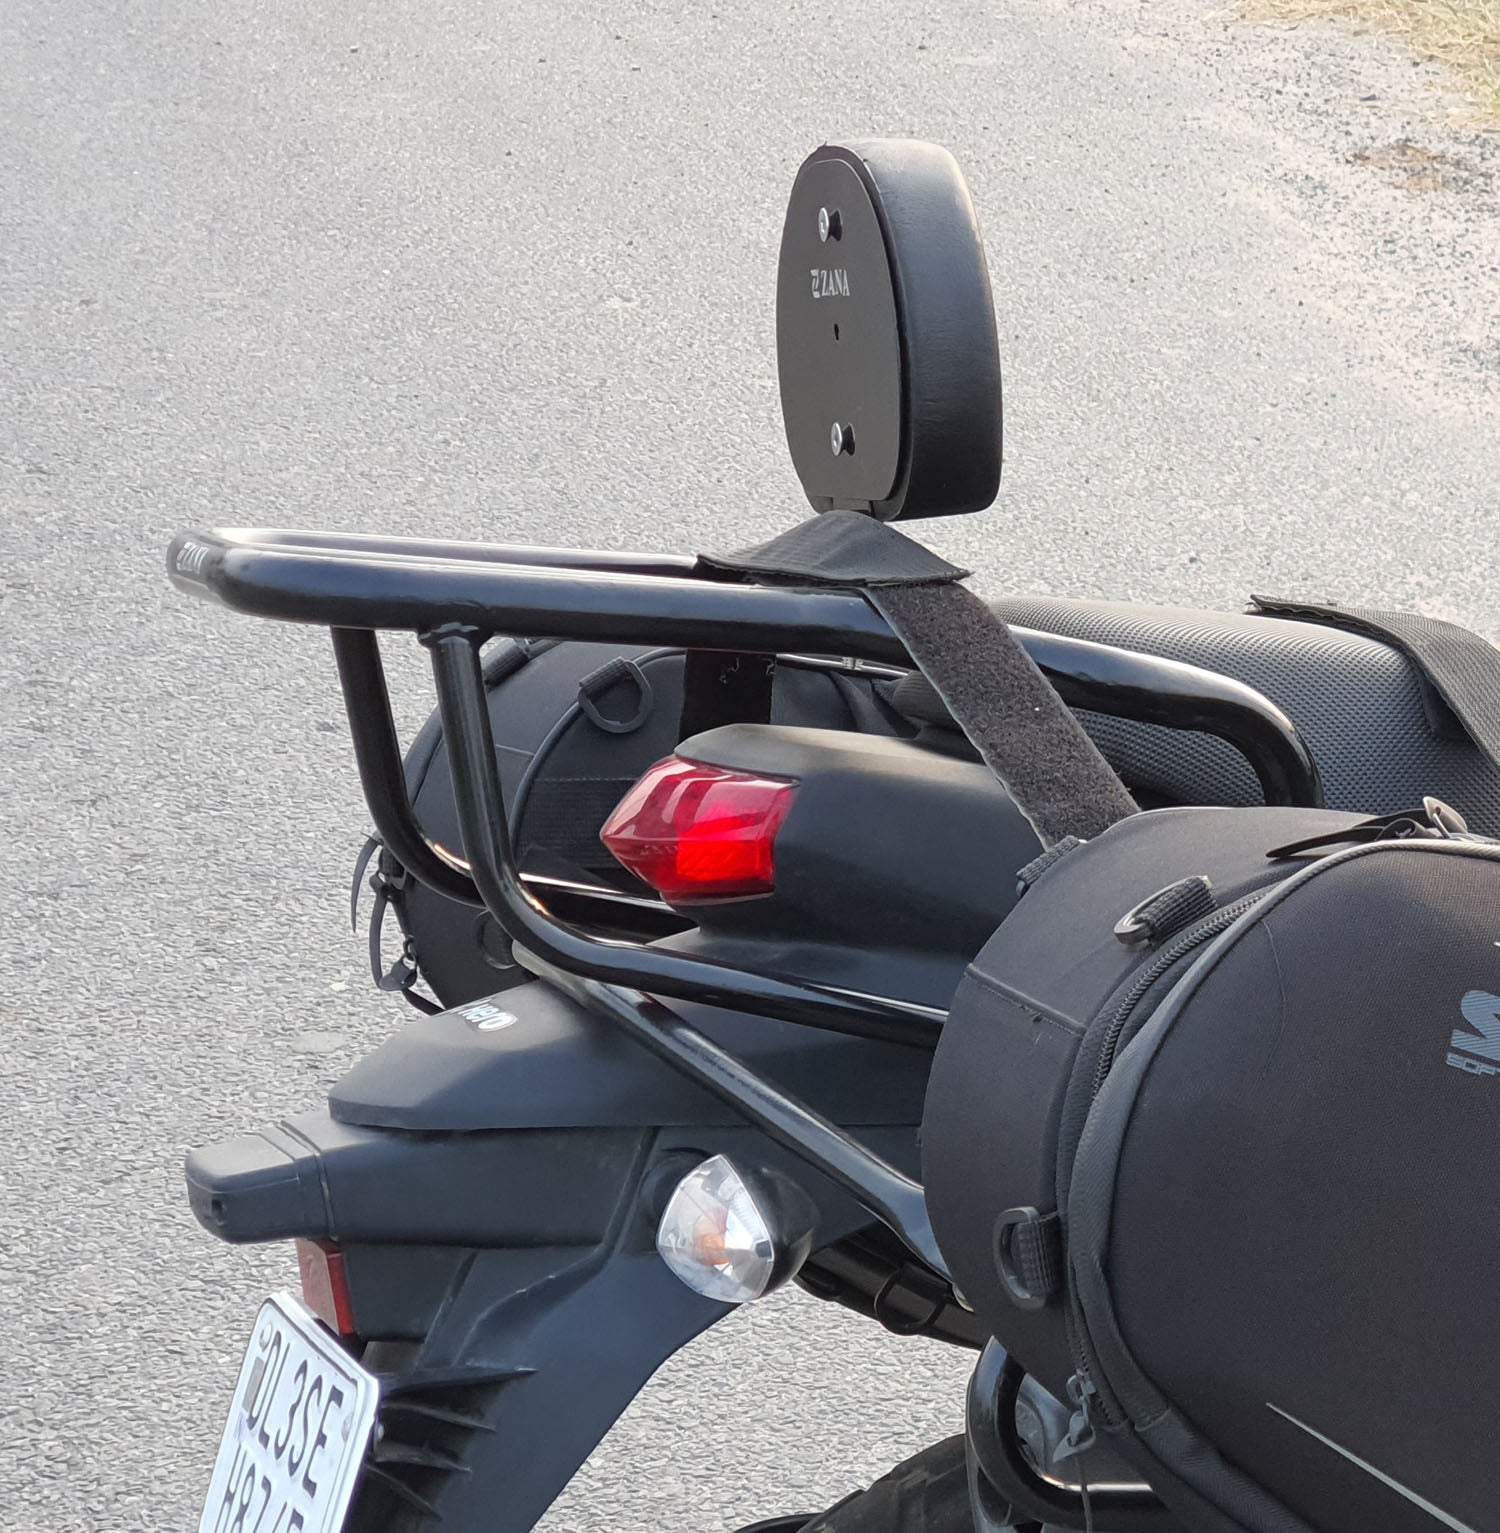 xpulse 200 luggage carrier